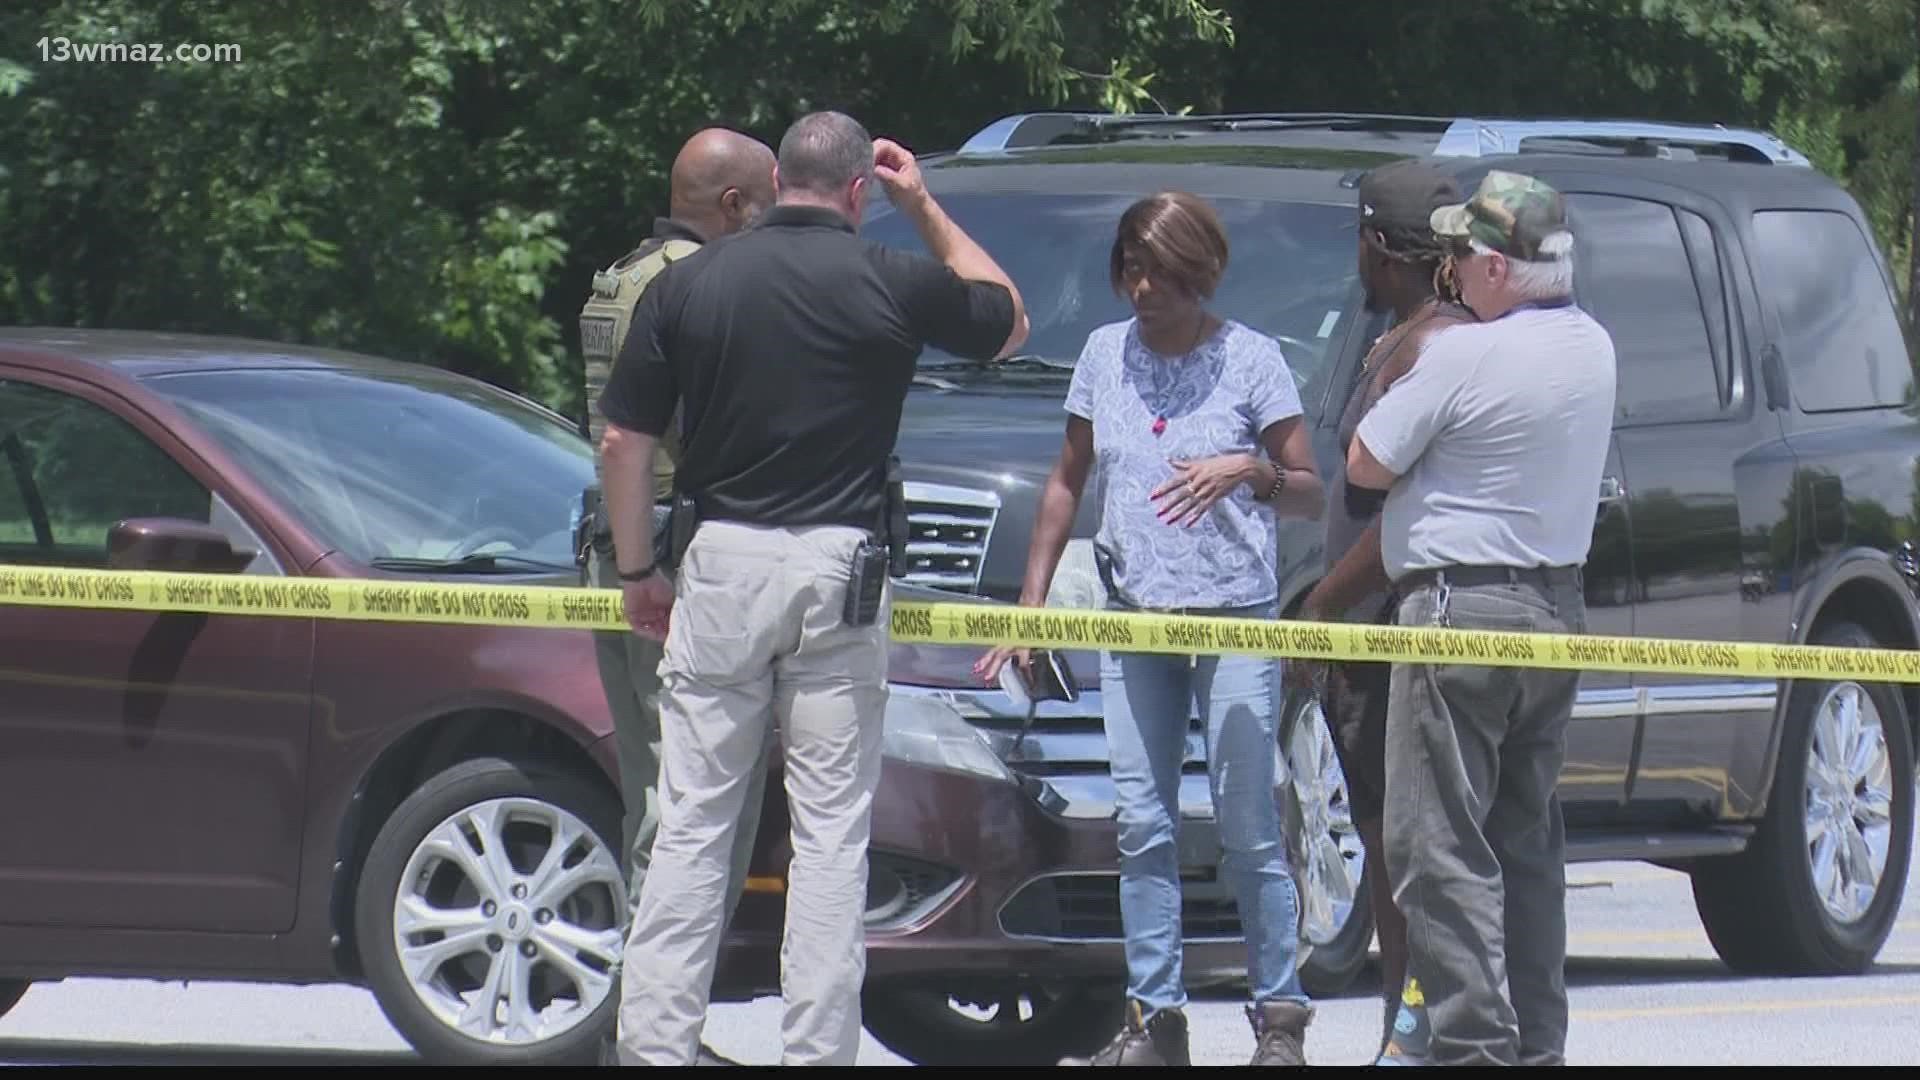 Witnesses gave 13WMAZ info that conflicted with what the Bibb County Sheriff's Office told us.